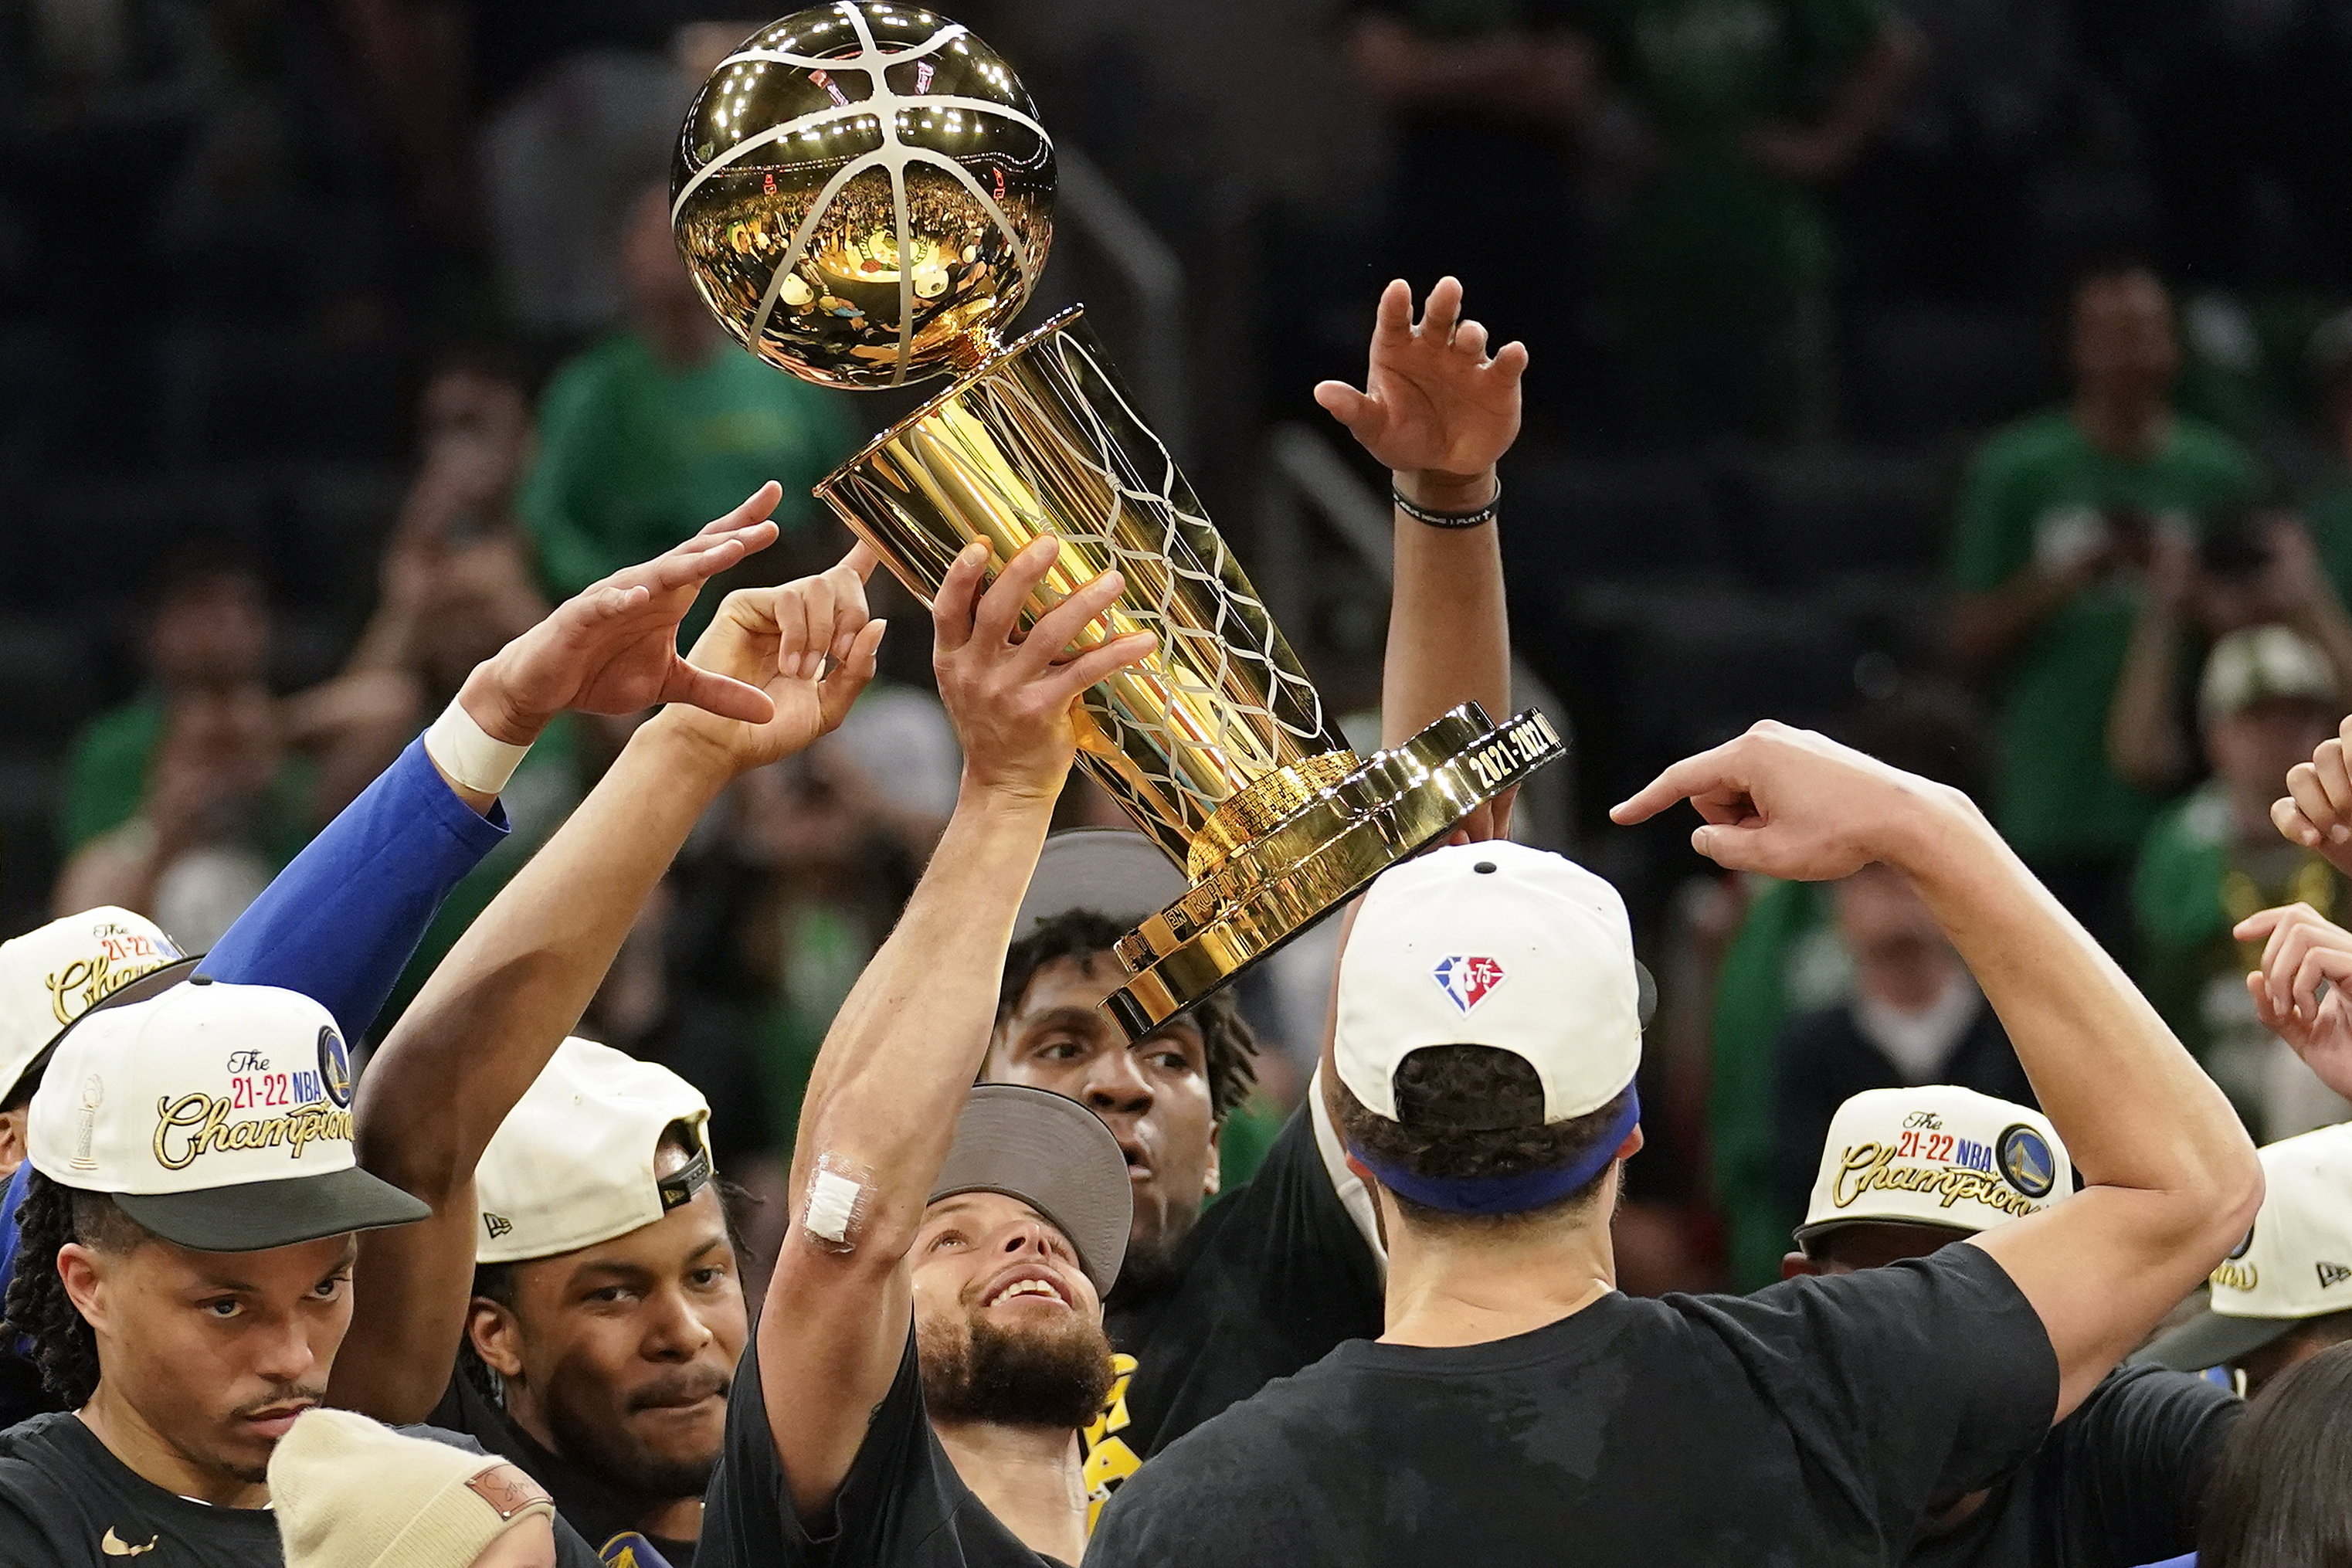 Warriors beat Celtics 103-90 to win 4th NBA title in 8 years